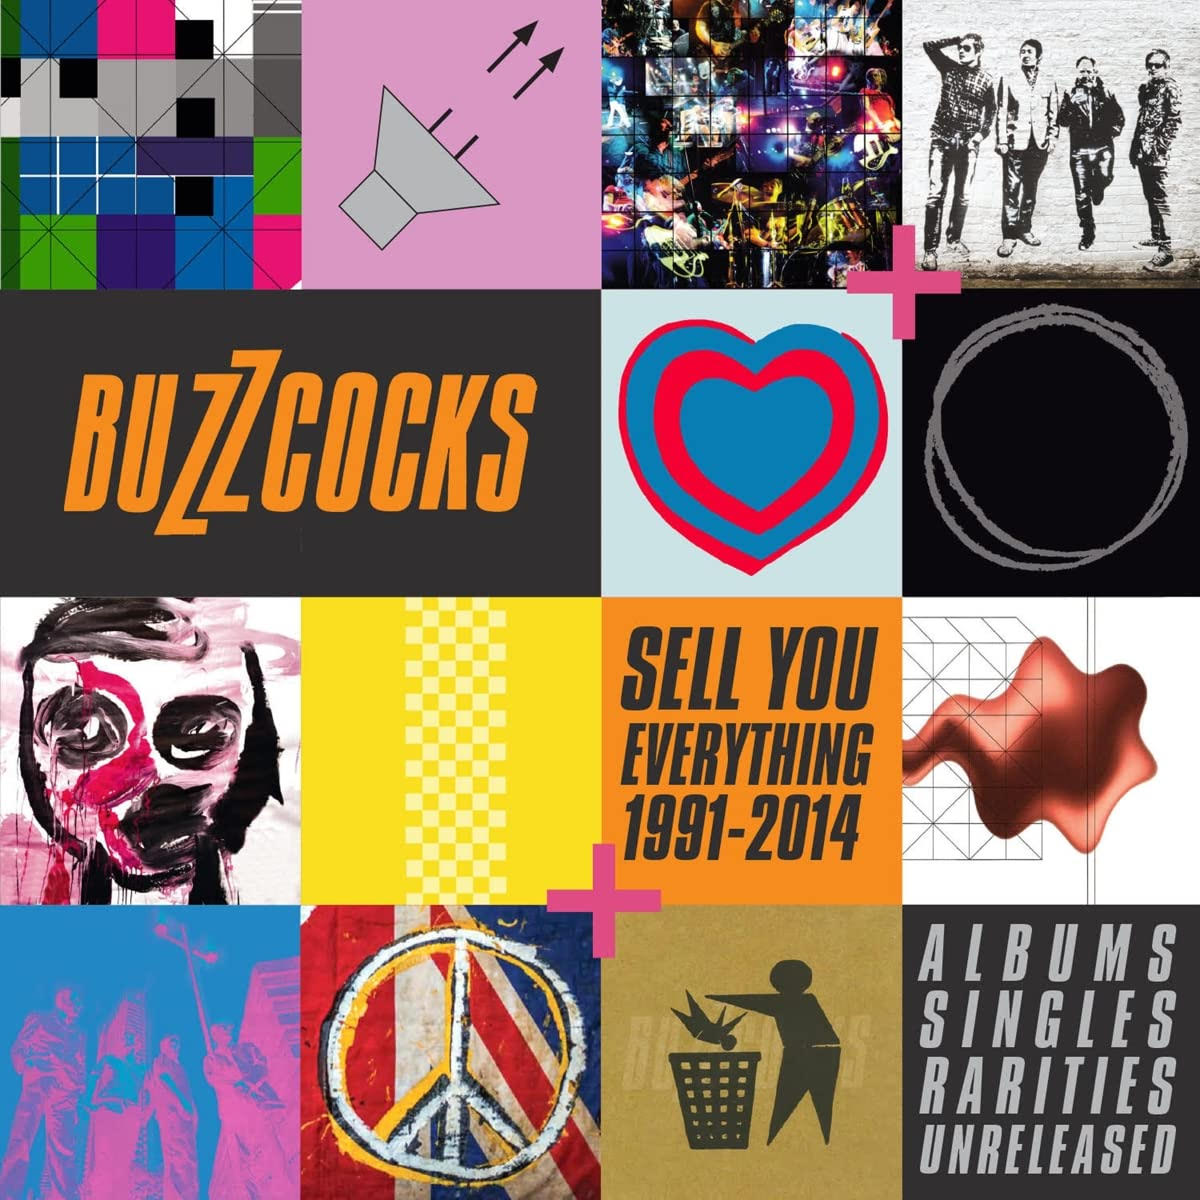 Buzzcocks - Sell You Everything (1991-2014) Albums, Singles, Rarities, Unreleased (8 CD Box Set Import)